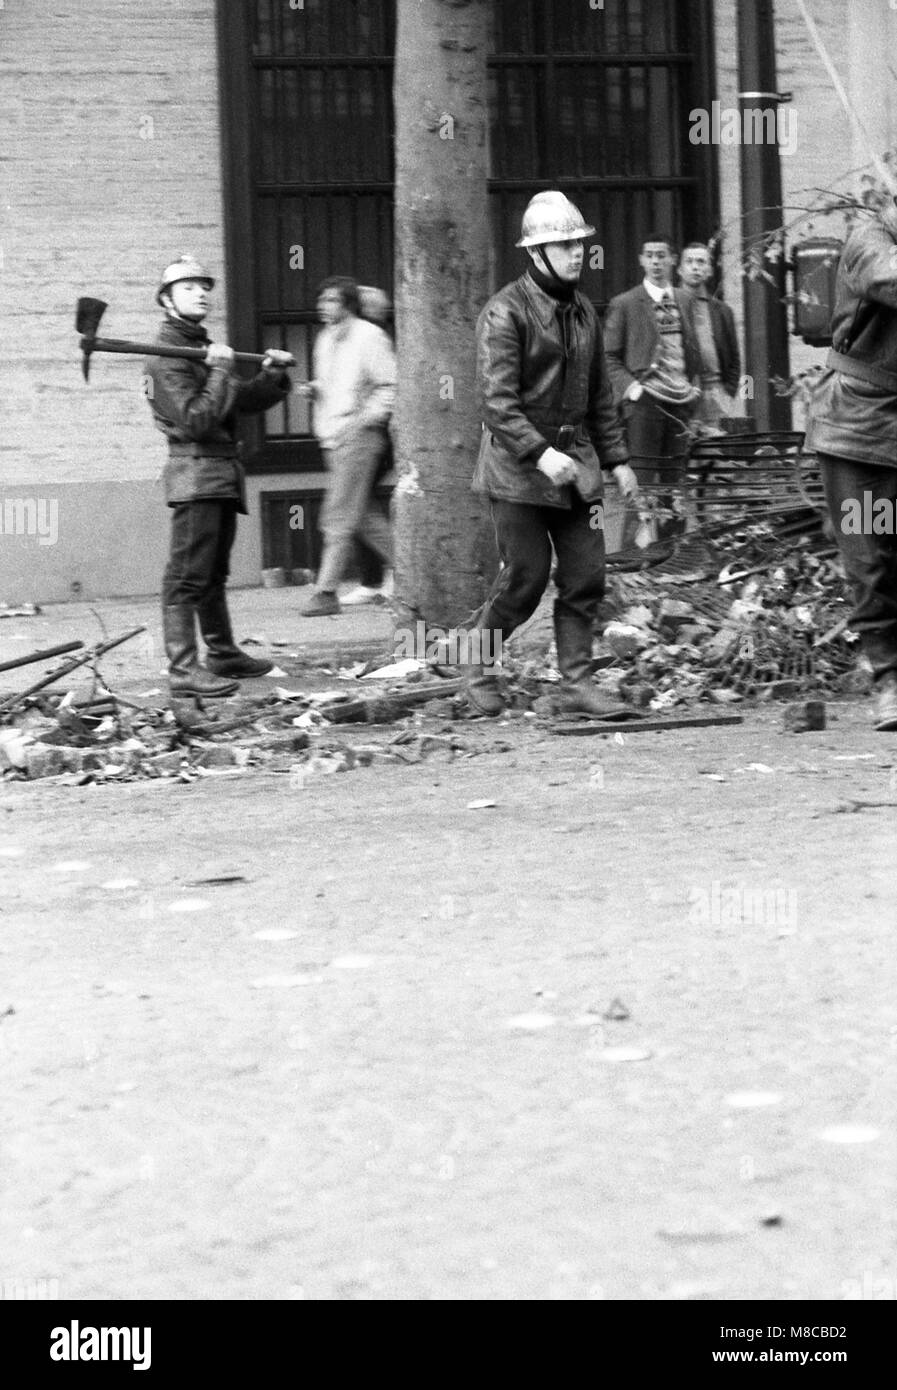 Philippe Gras / Le Pictorium -  May 68 -  1968  -  France / Ile-de-France (region) / Paris  -  Firefighters clear the remains of the barricades that strew the streets of Paris Stock Photo